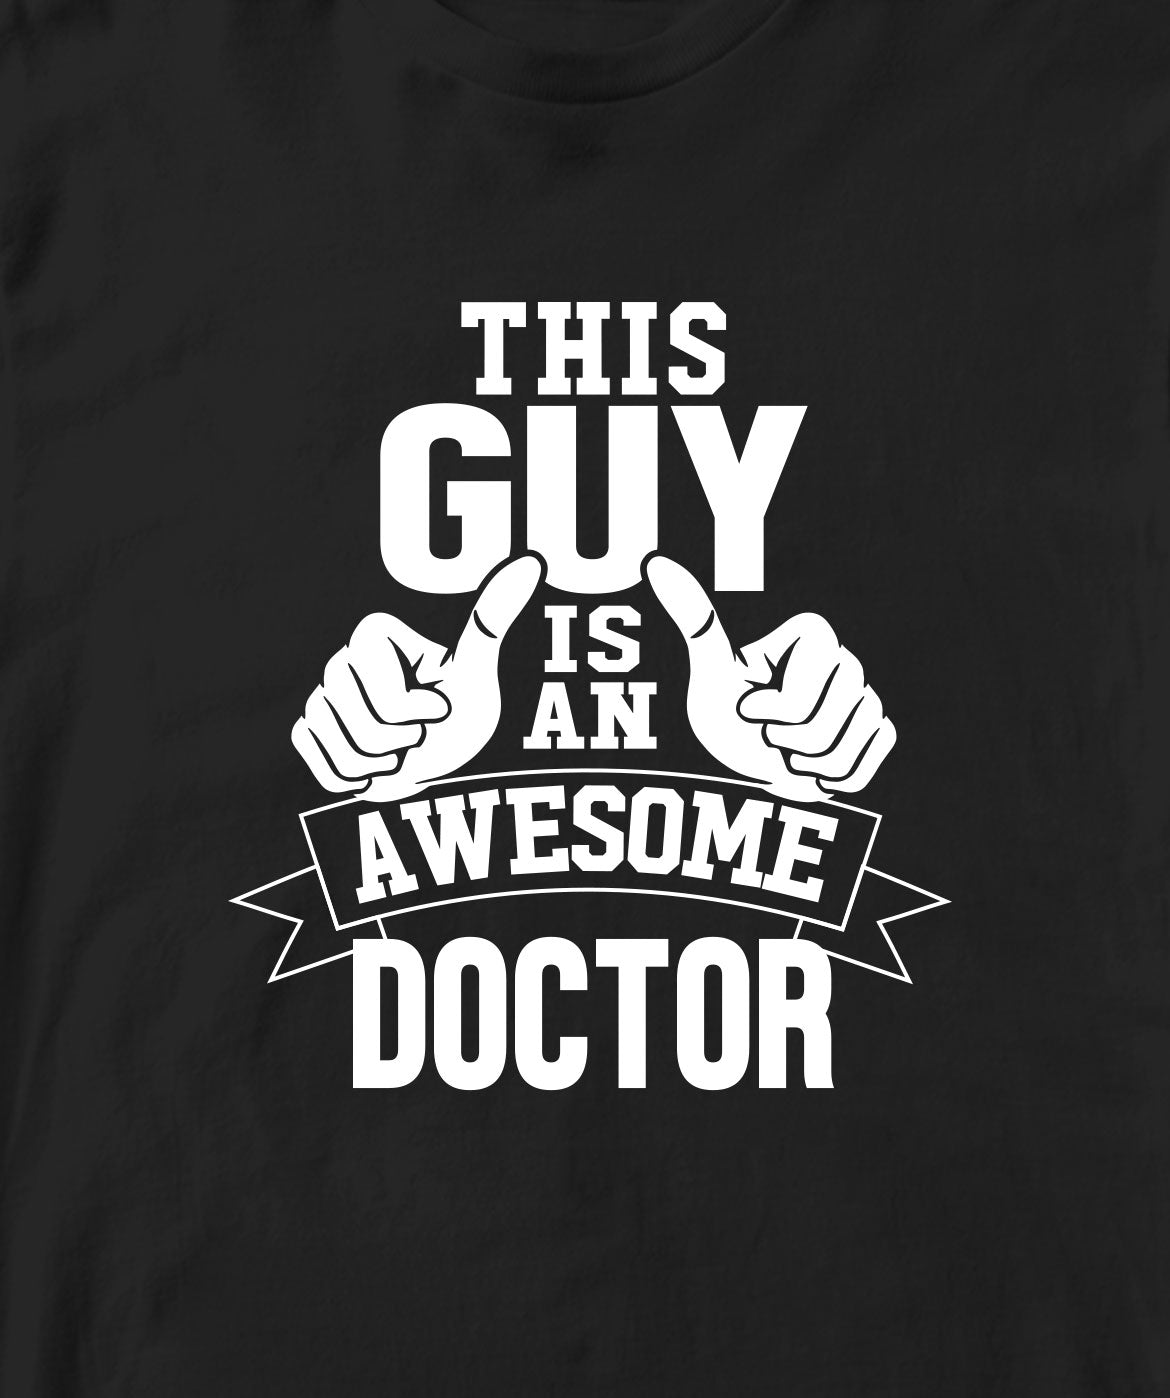 THIS GUY IS AN AWESOME DOCTOR TSHIRT